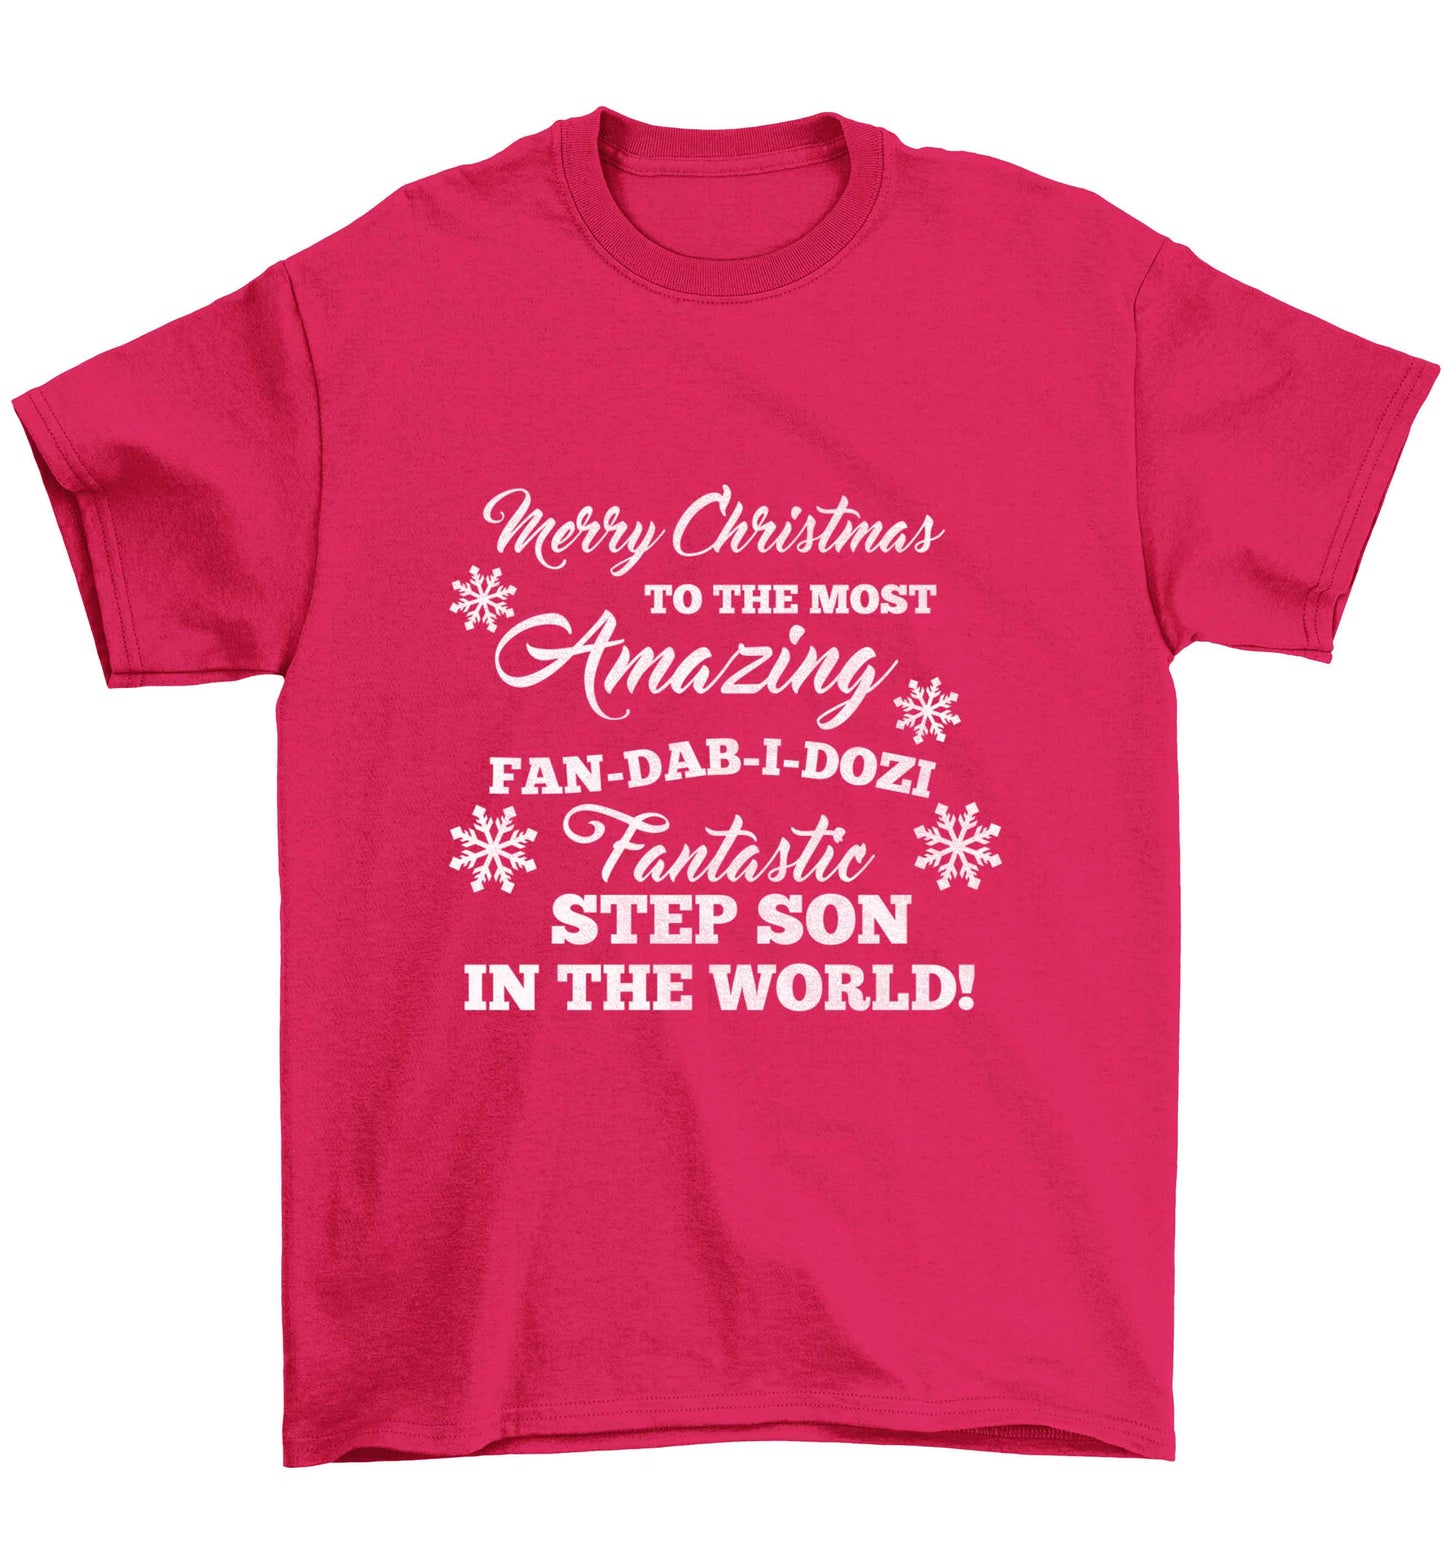 Merry Christmas to the most amazing fan-dab-i-dozi fantasic Step Son in the world Children's pink Tshirt 12-13 Years